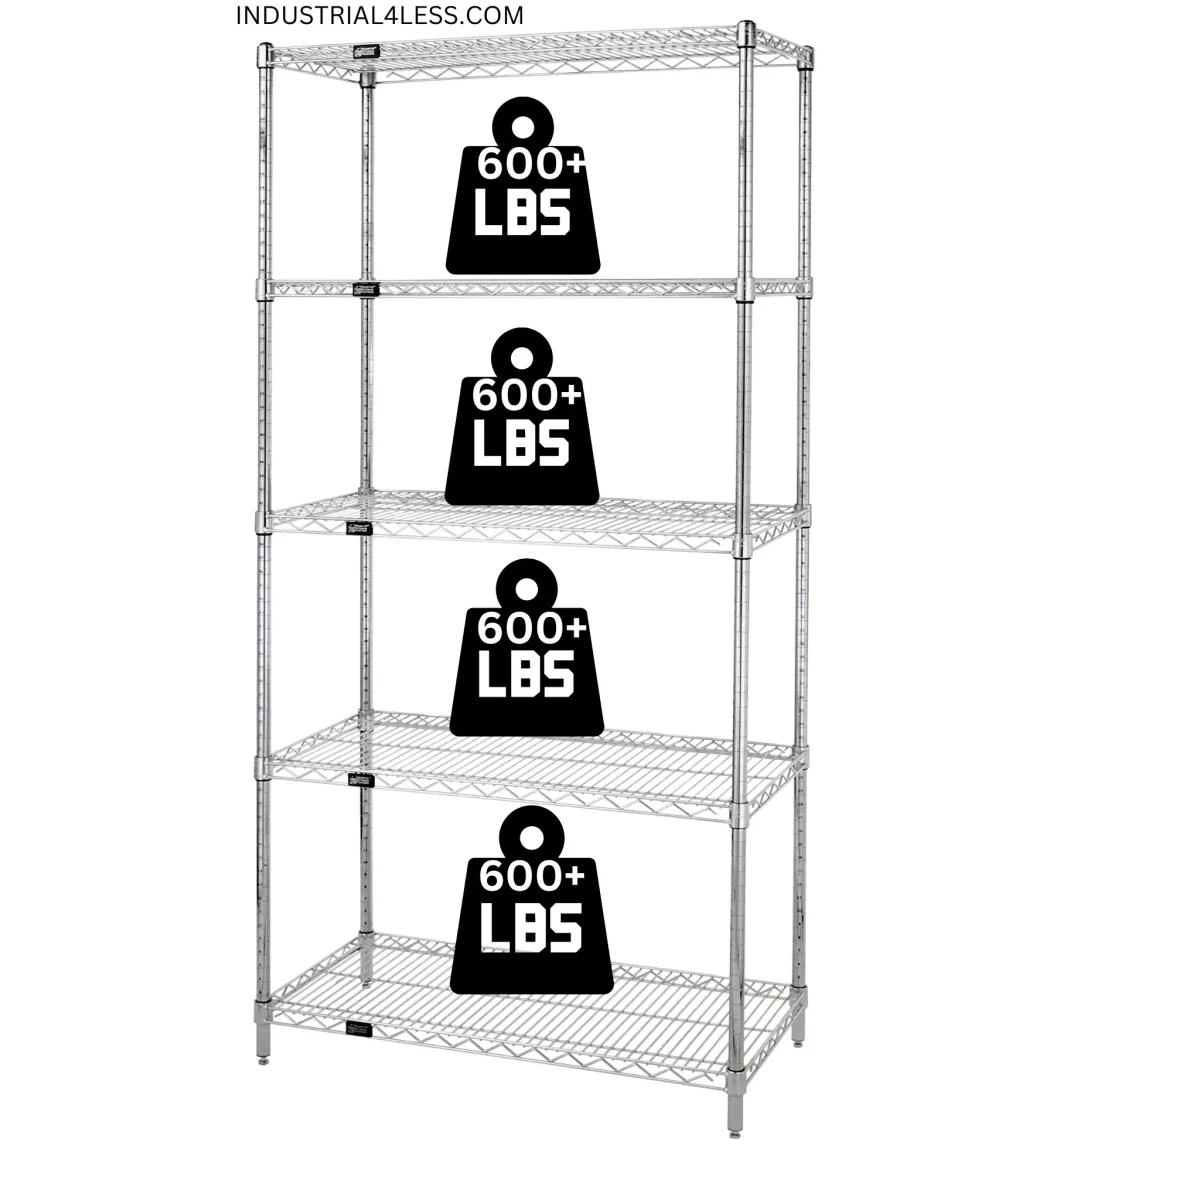 24" x 24" Stainless Steel Wire Shelving Unit - Industrial 4 Less - 24245S-5